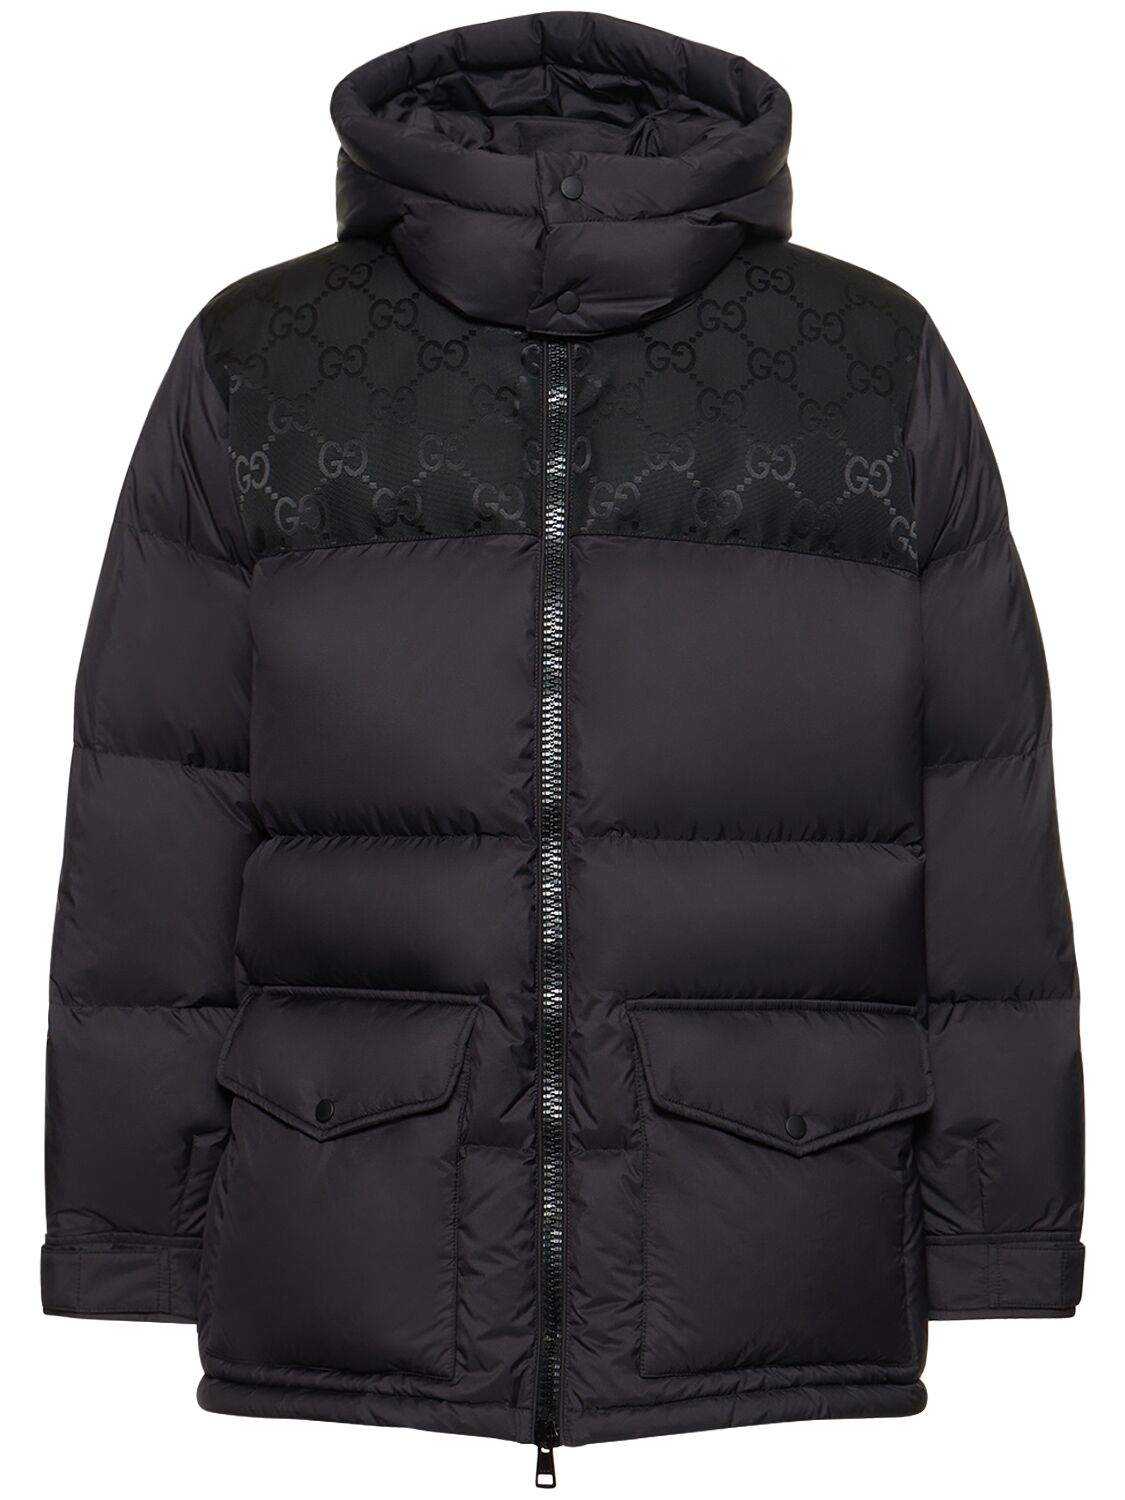 Image of Ripstop Nylon Down Jacket W/ Gg Details